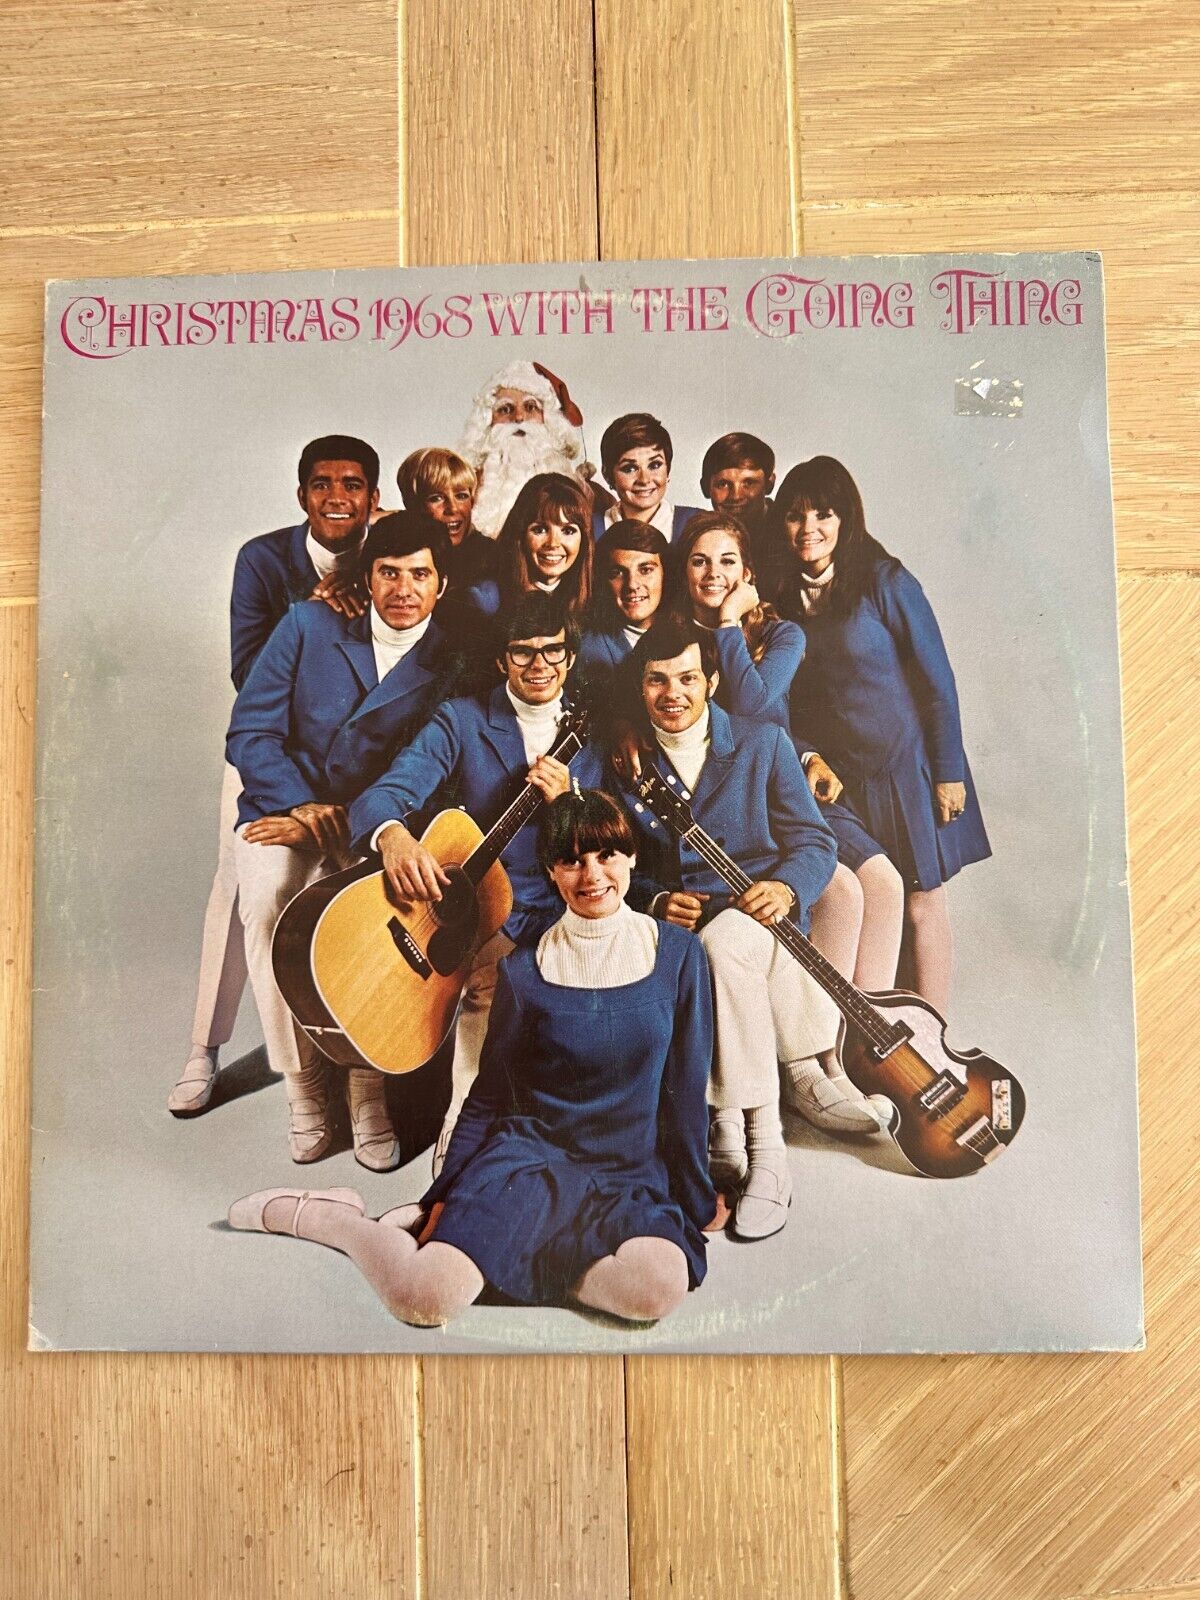 The Going Thing - Christmas 1968 With - 1968 VG+ Ford Motor Company vinyl LP